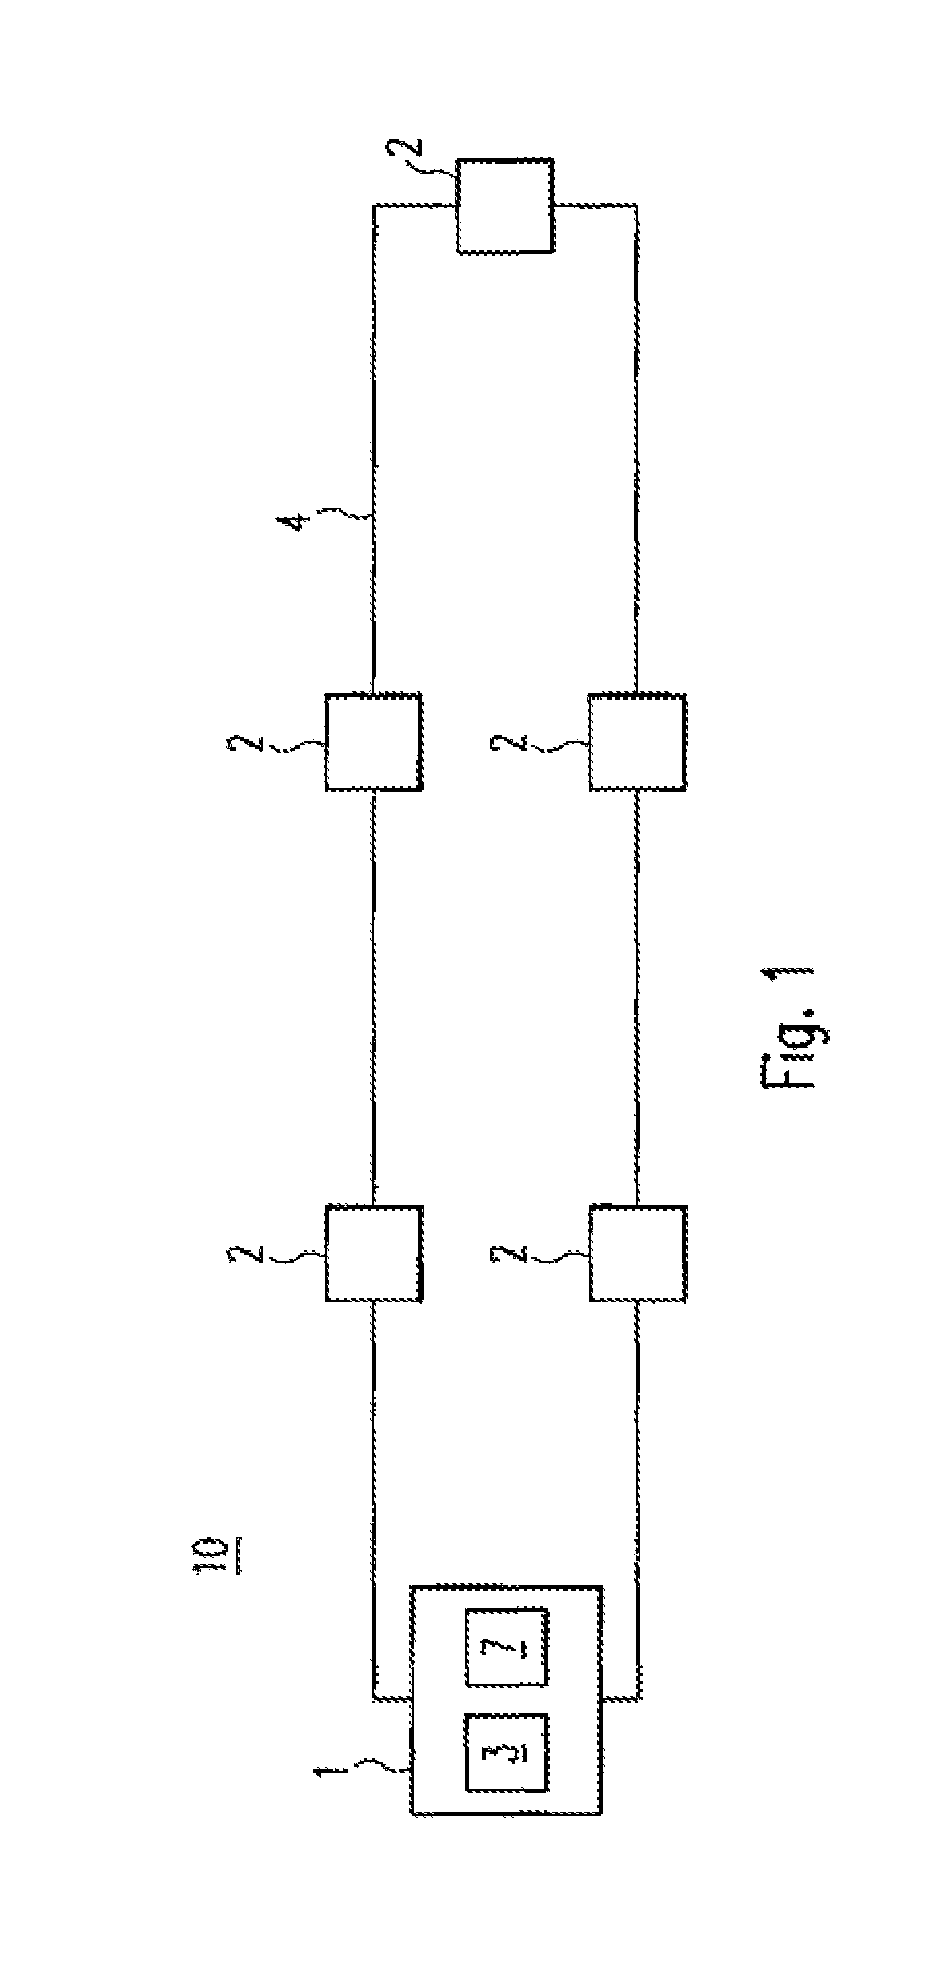 Central unit of a bus system, bus system and method for locating bus subscribers